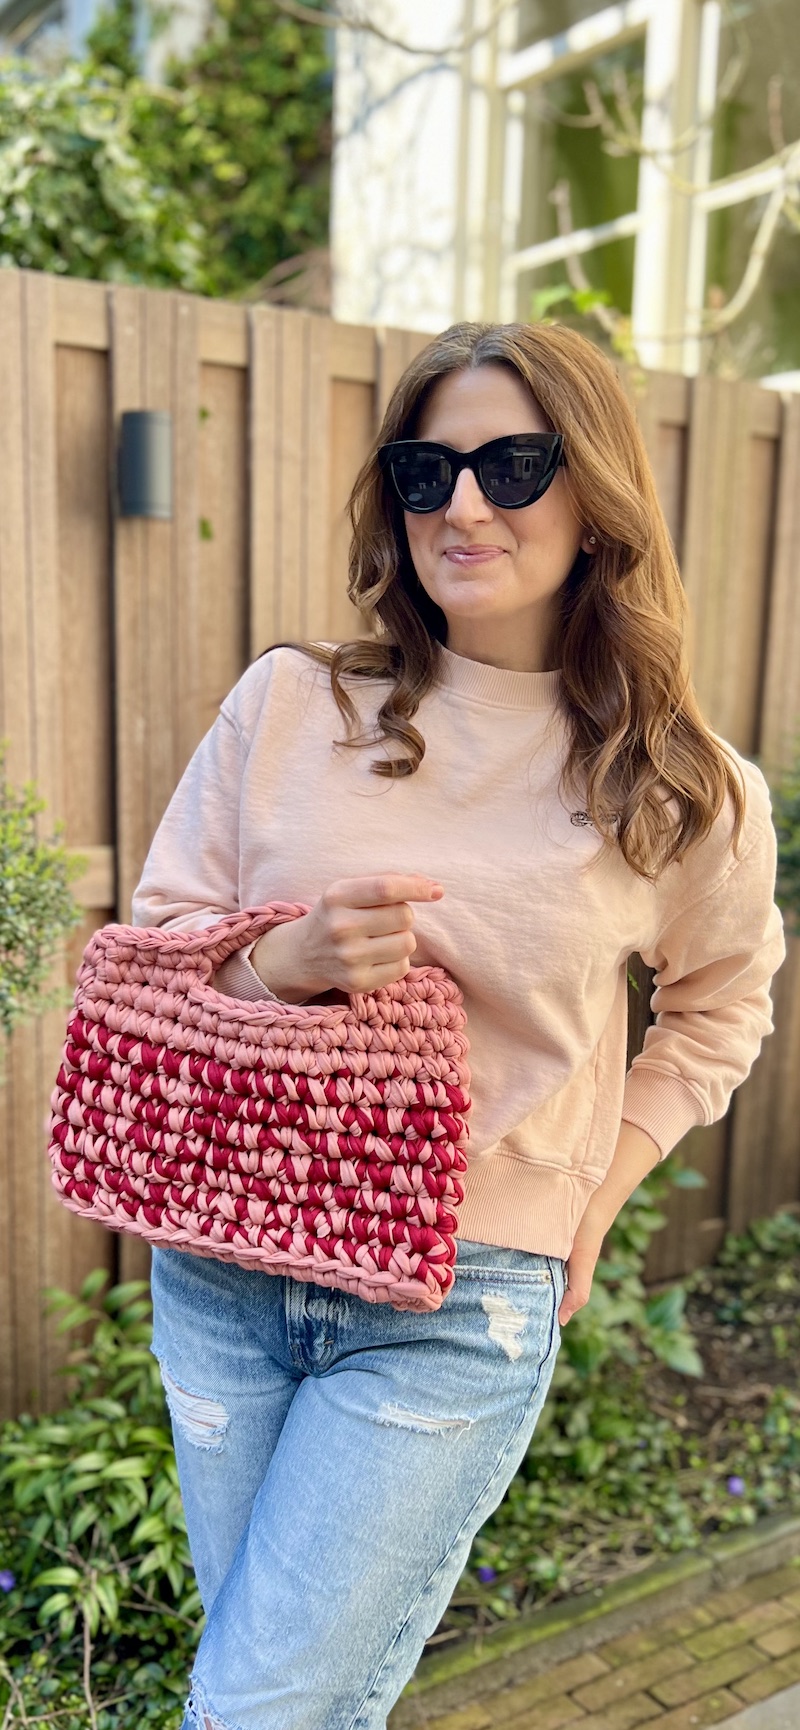 Pippa Crochet Tote Pattern by Erin at Cathedrals & Cafes